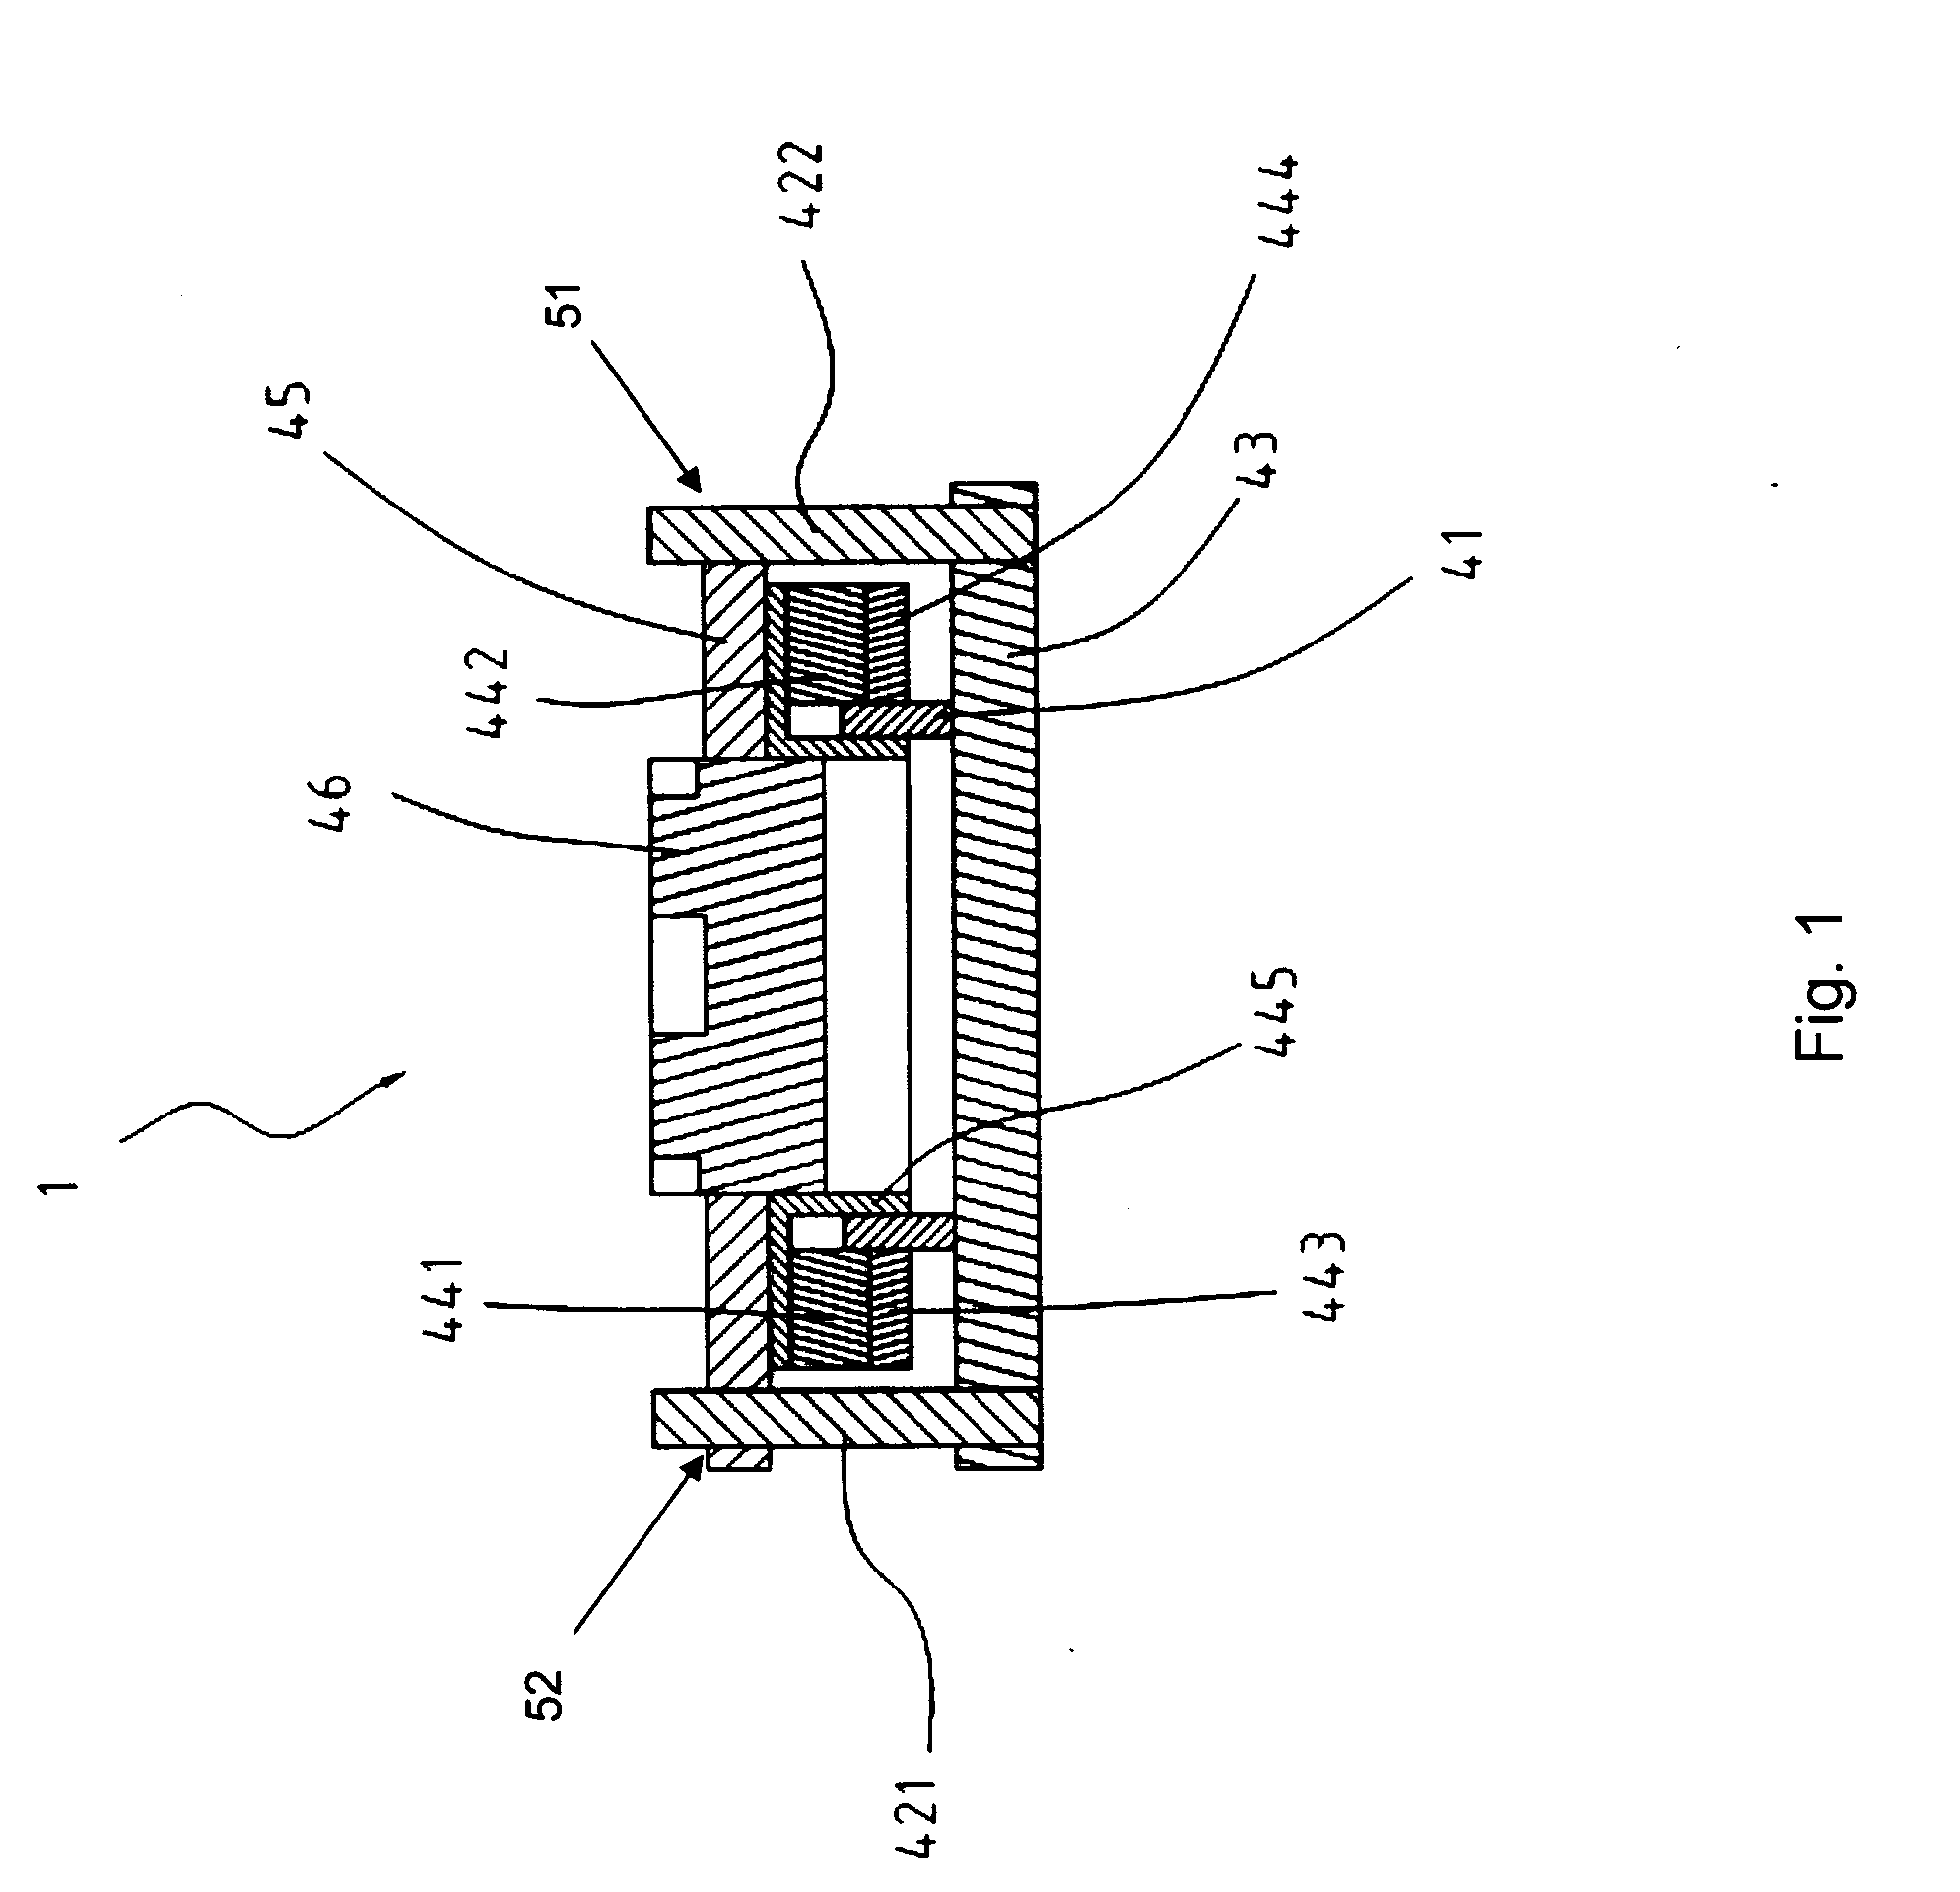 Low power voice coil motor with a guiding magnet shell